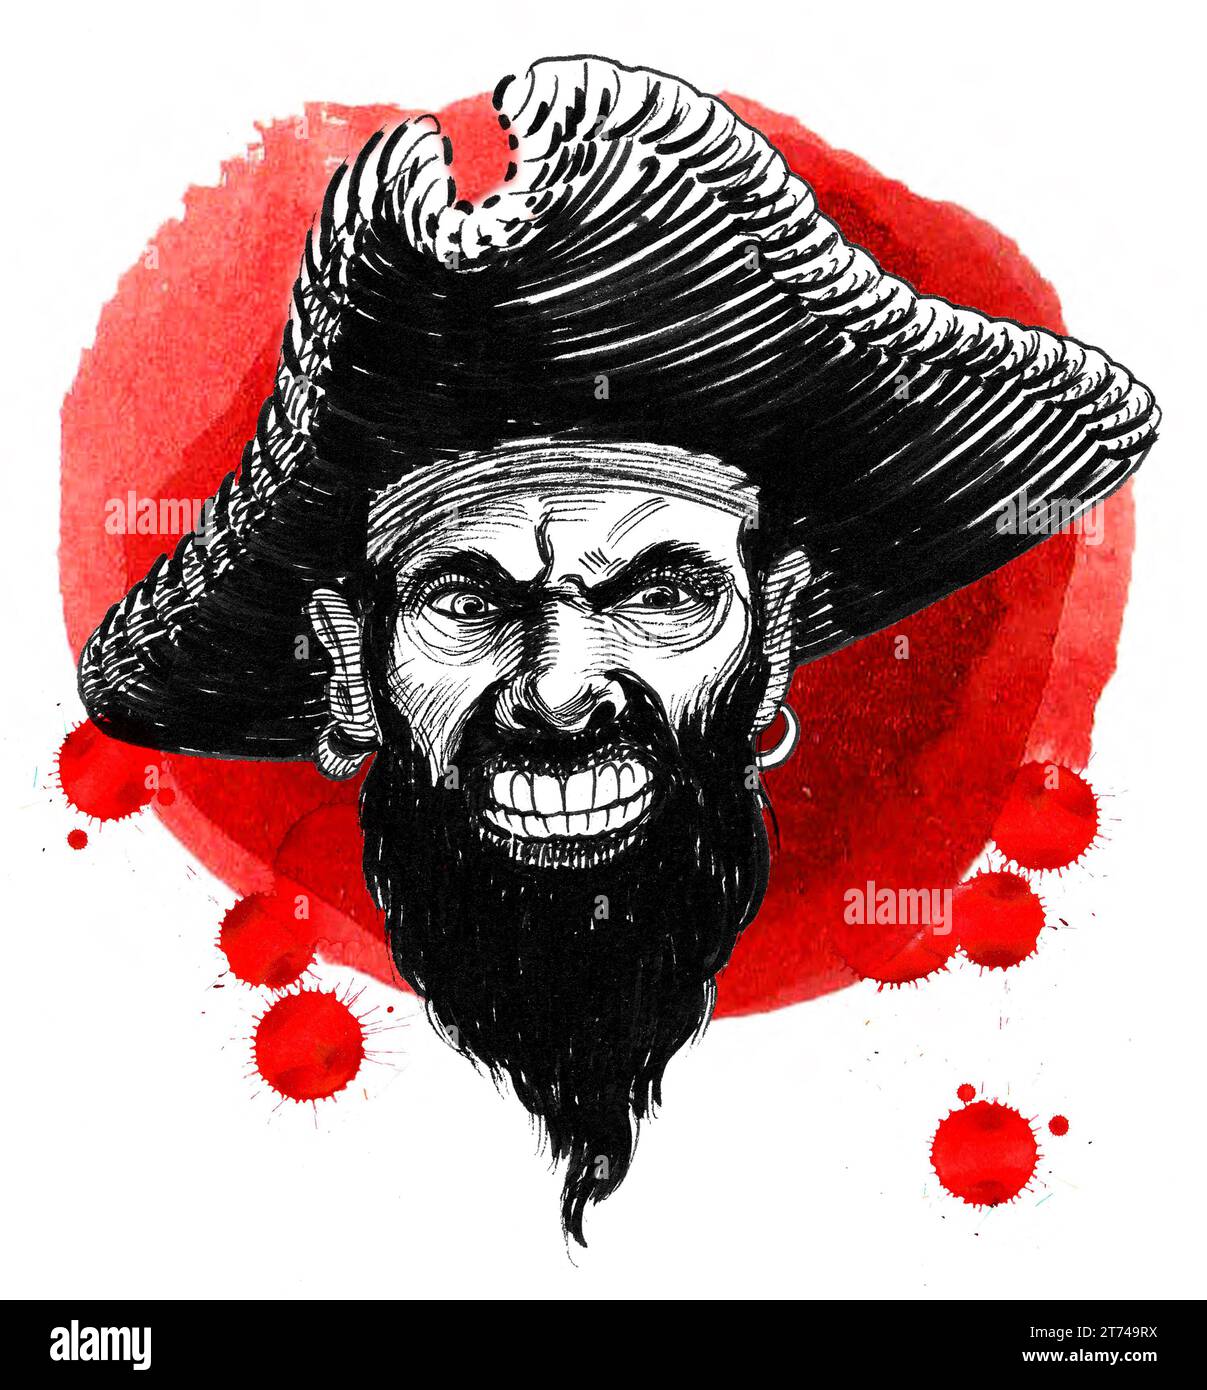 Angry Pirate Head Hand Drawn Vintage Styled Ink And Watercolor Illustration Stock Photo Alamy